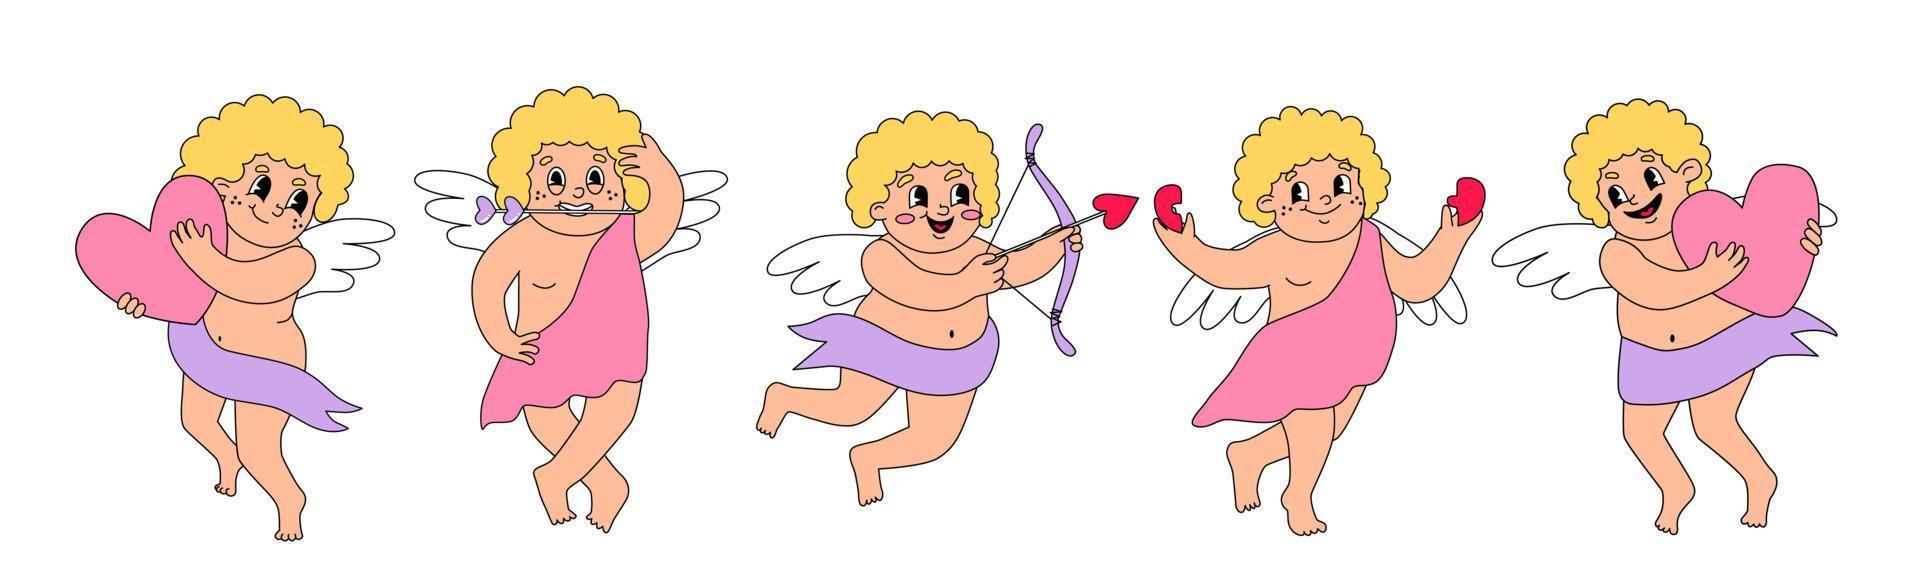 Cute vintage set of cupids. Vector illustration about valentine's day, love. Little groovy angel has wings, bow, arrow and aim.